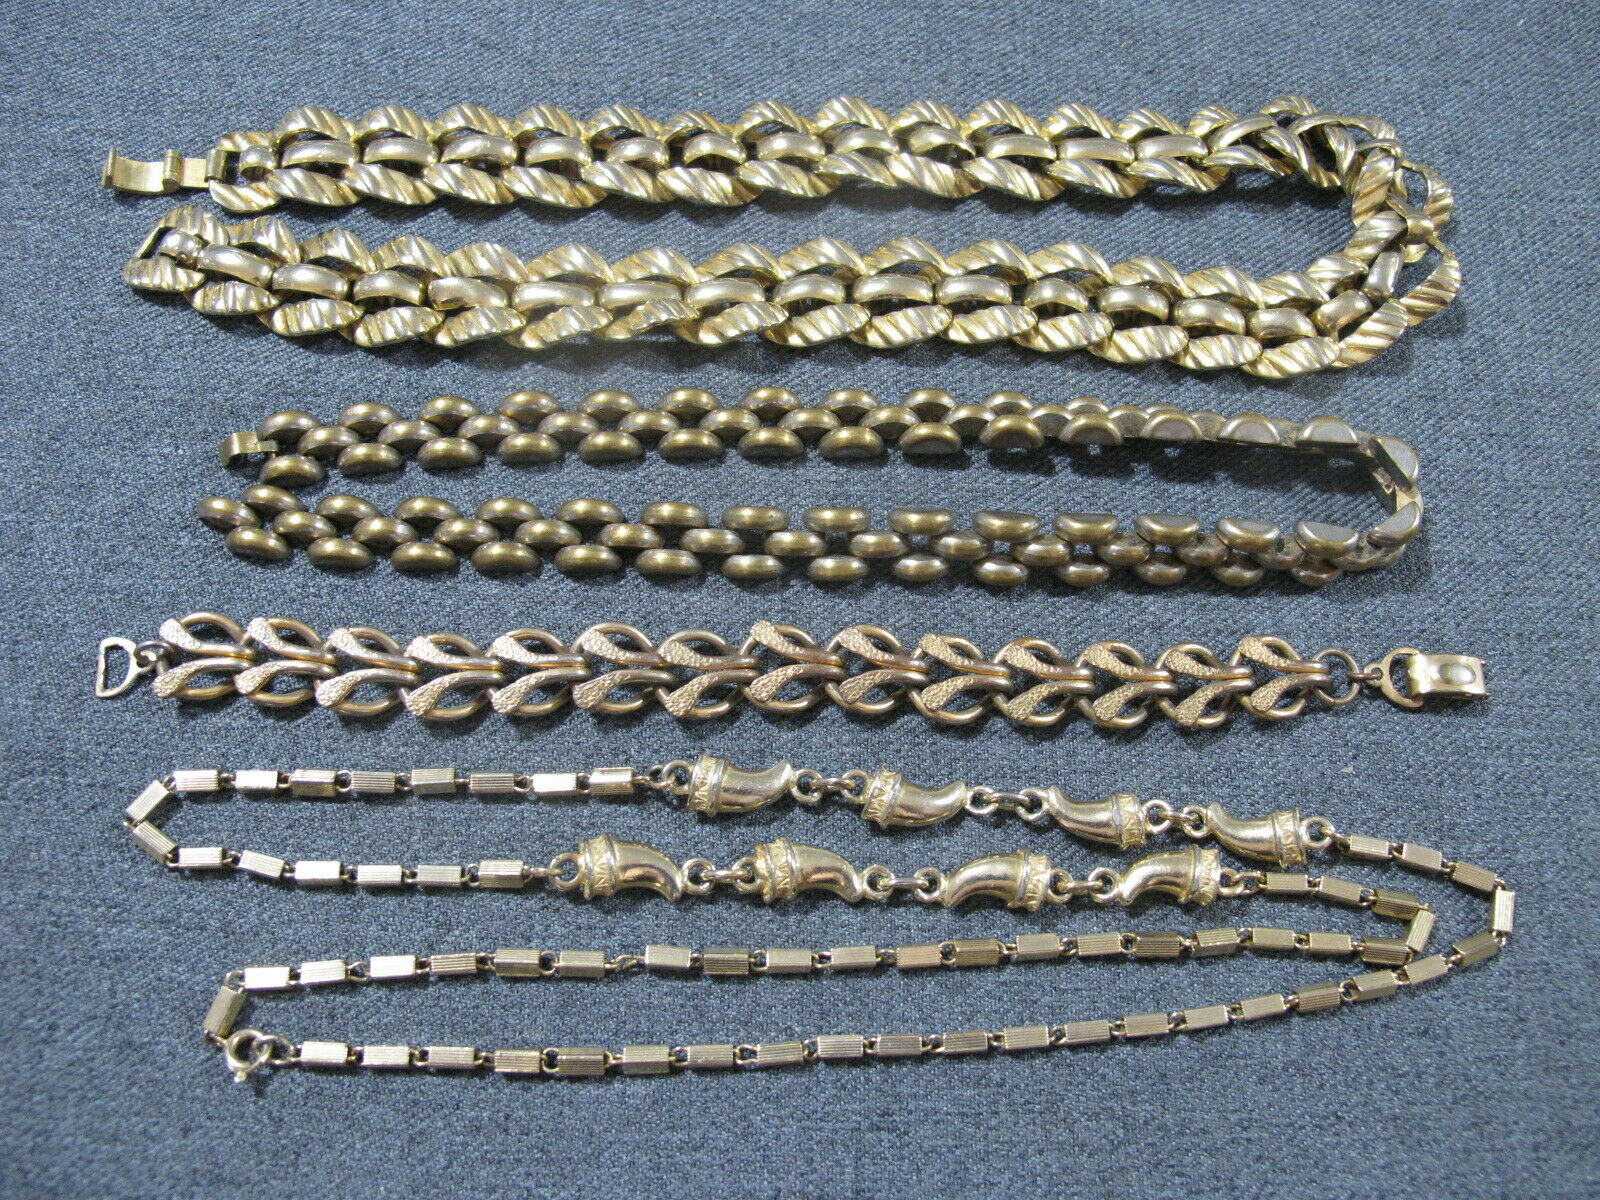 Vintage Chain Necklaces & Bracelet For Spare Parts, Repair, Repurpose Jewelry Ma